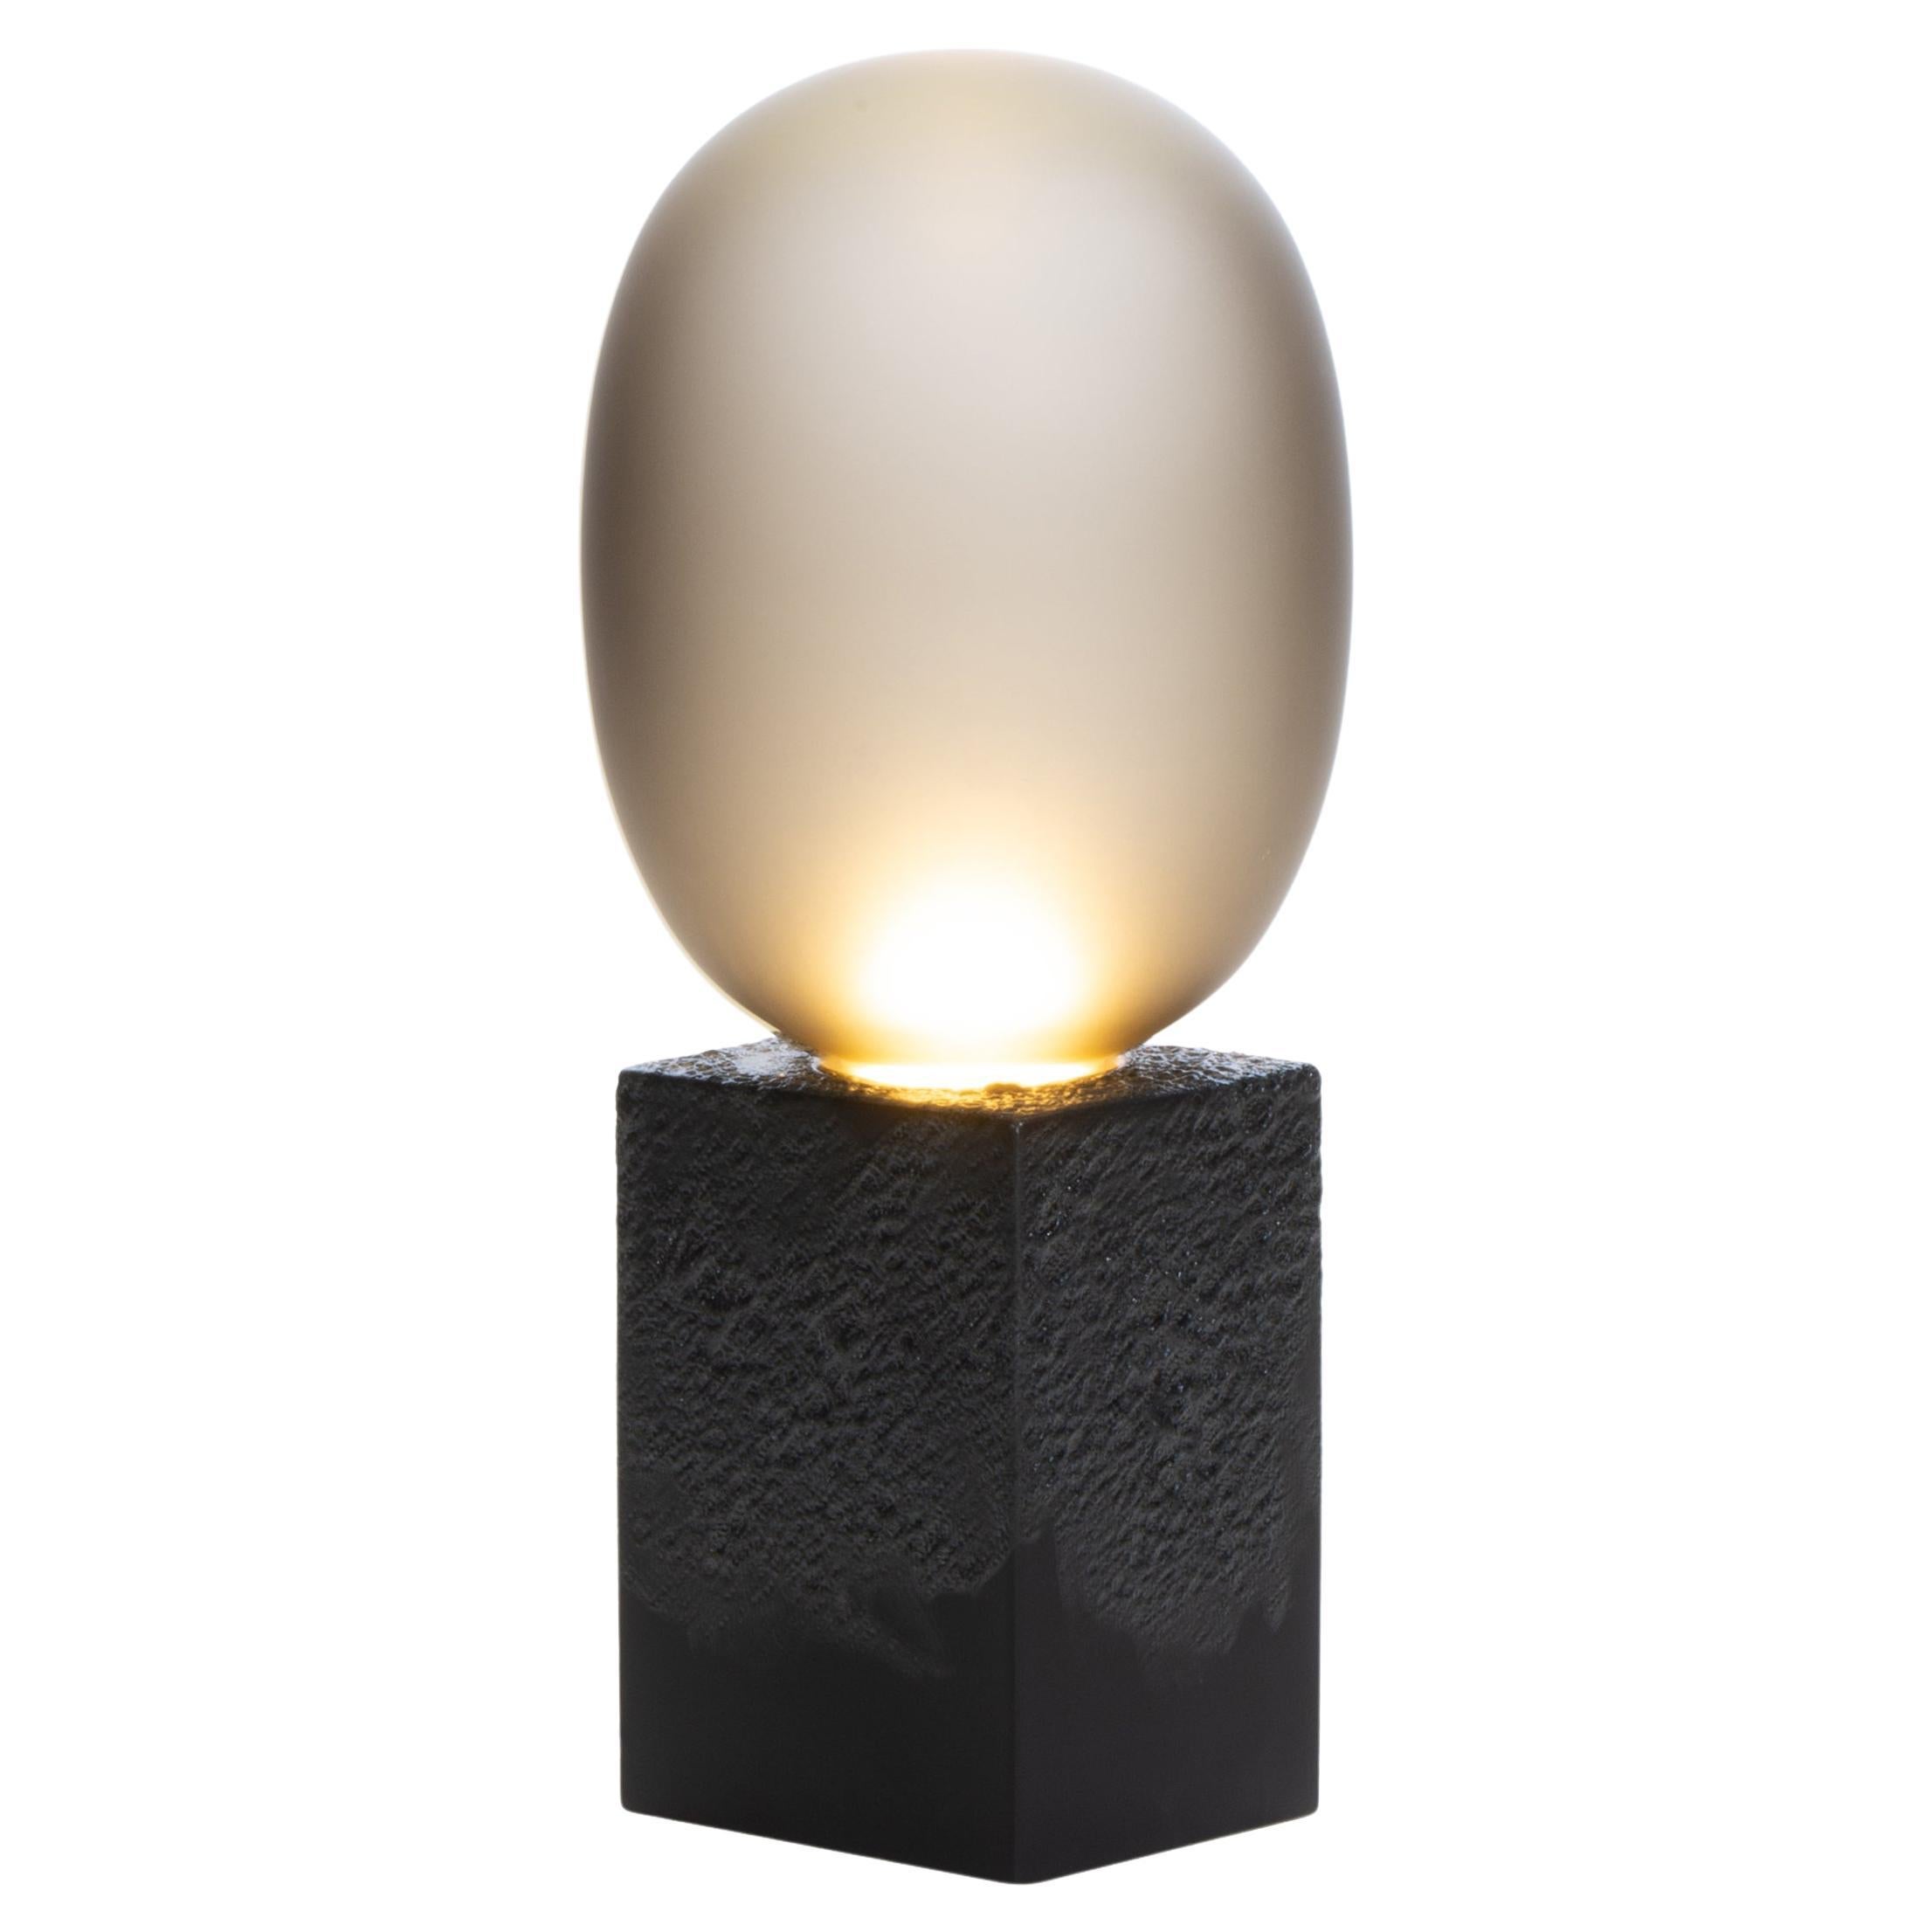 Magma One High Smoky Grey Acetato Black Table Lamp by Pulpo